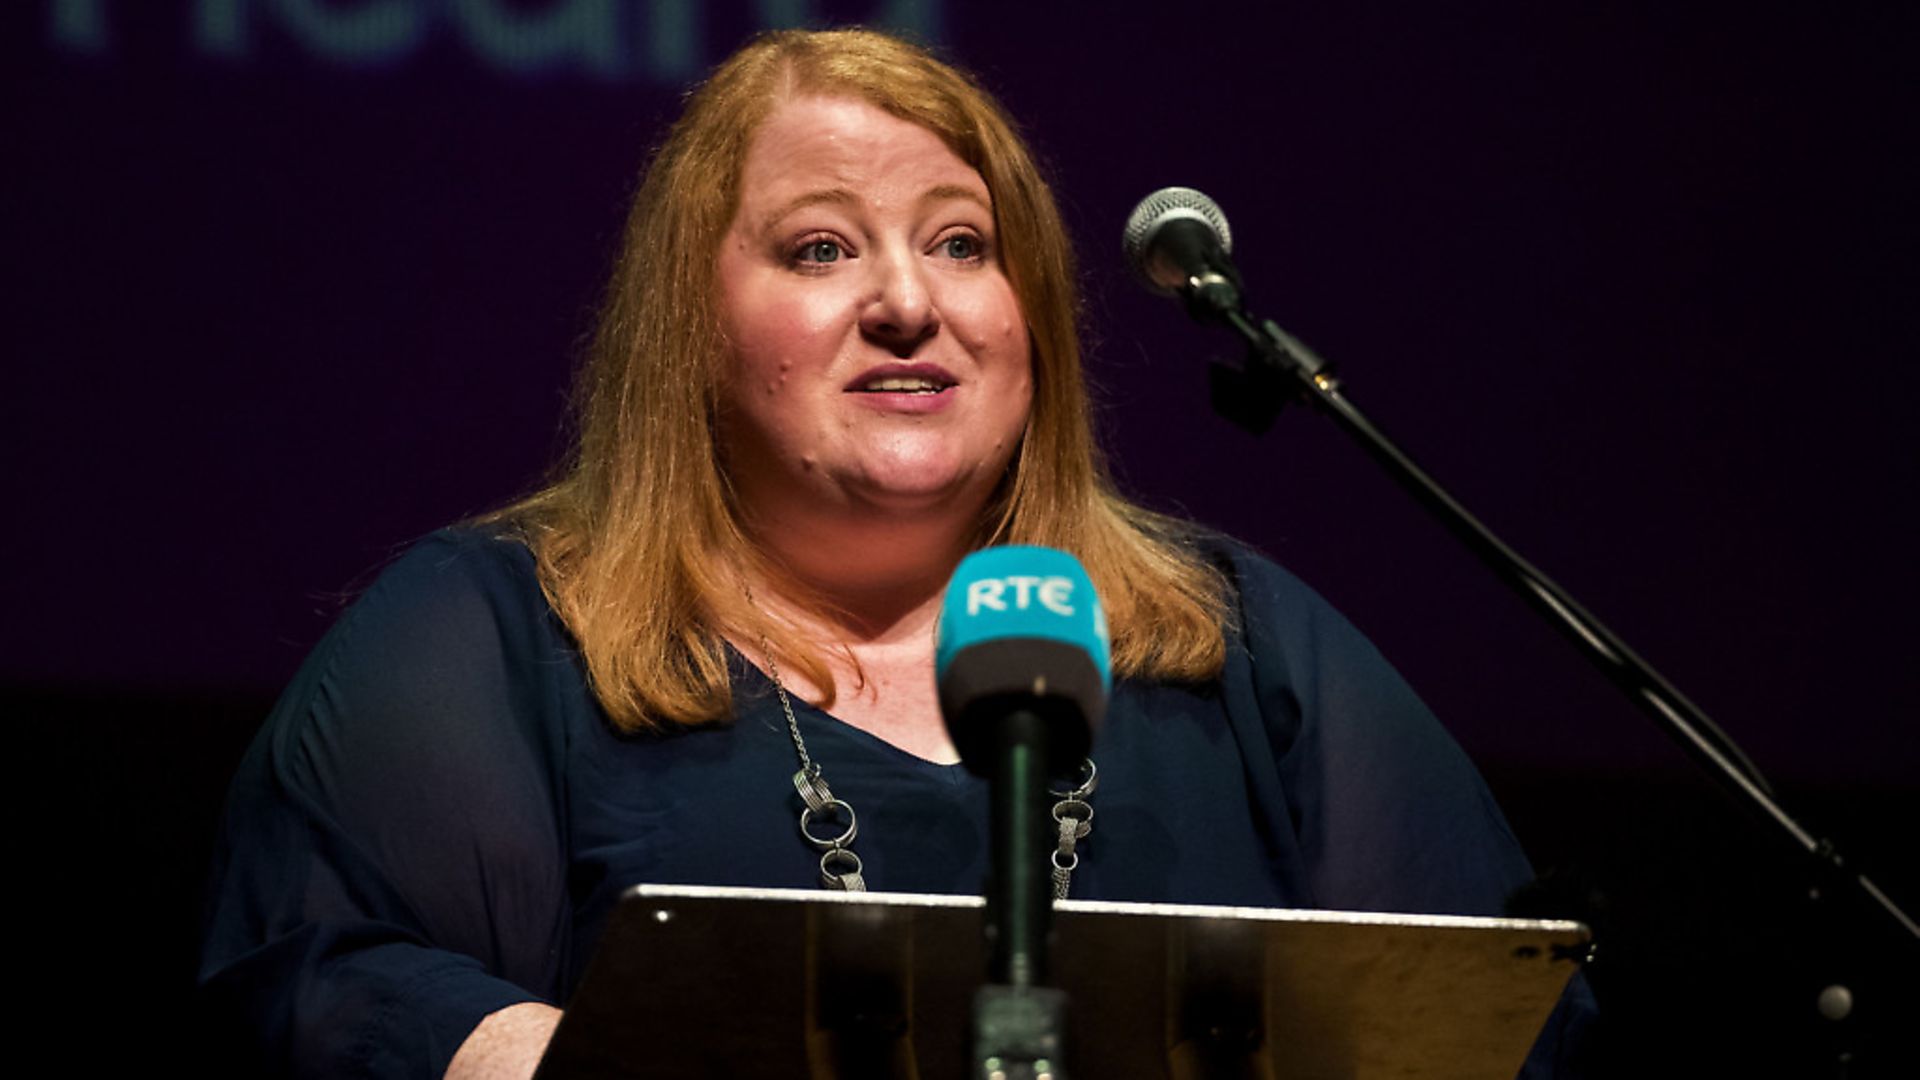 Alliance Party of Northern Ireland leader Naomi Long. Photograph: Liam McBurney/PA Wire. - Credit: PA